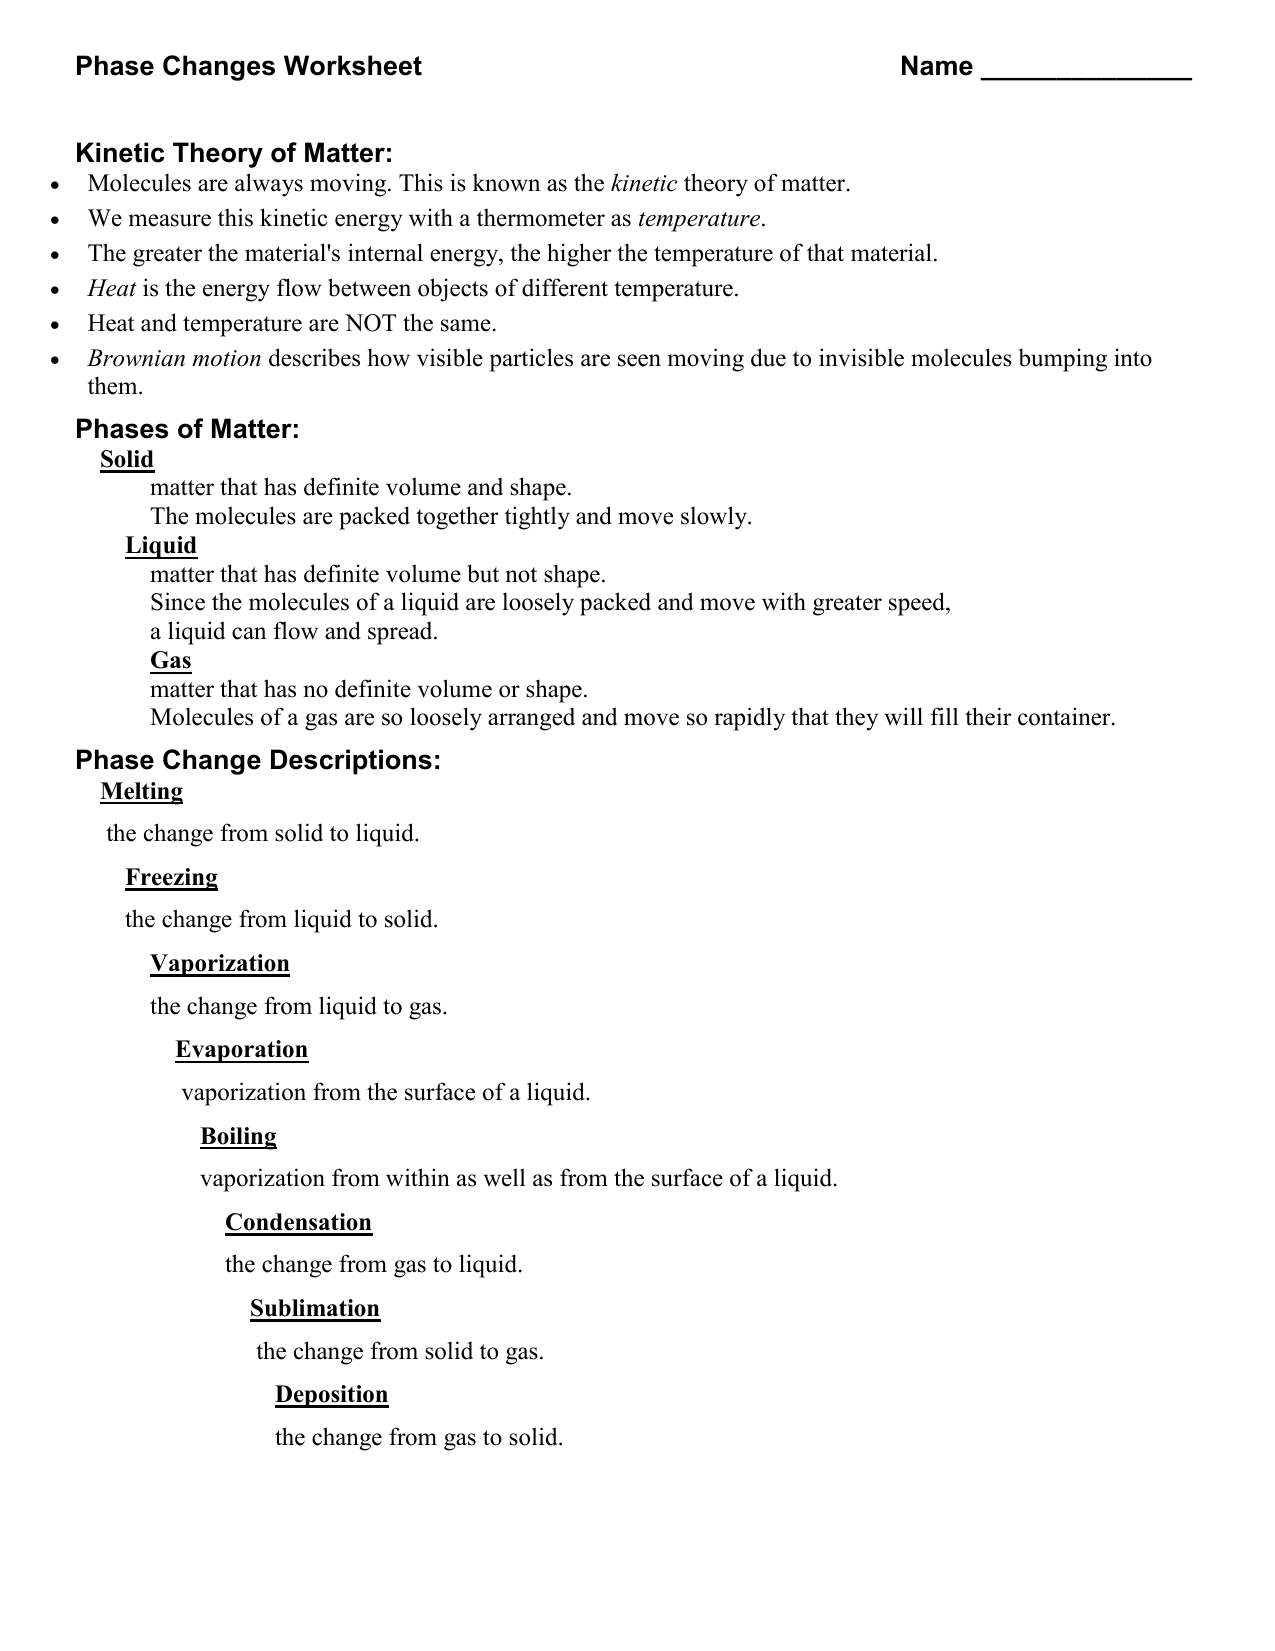 Phase Changes Worksheet With Phase Change Worksheet Answers